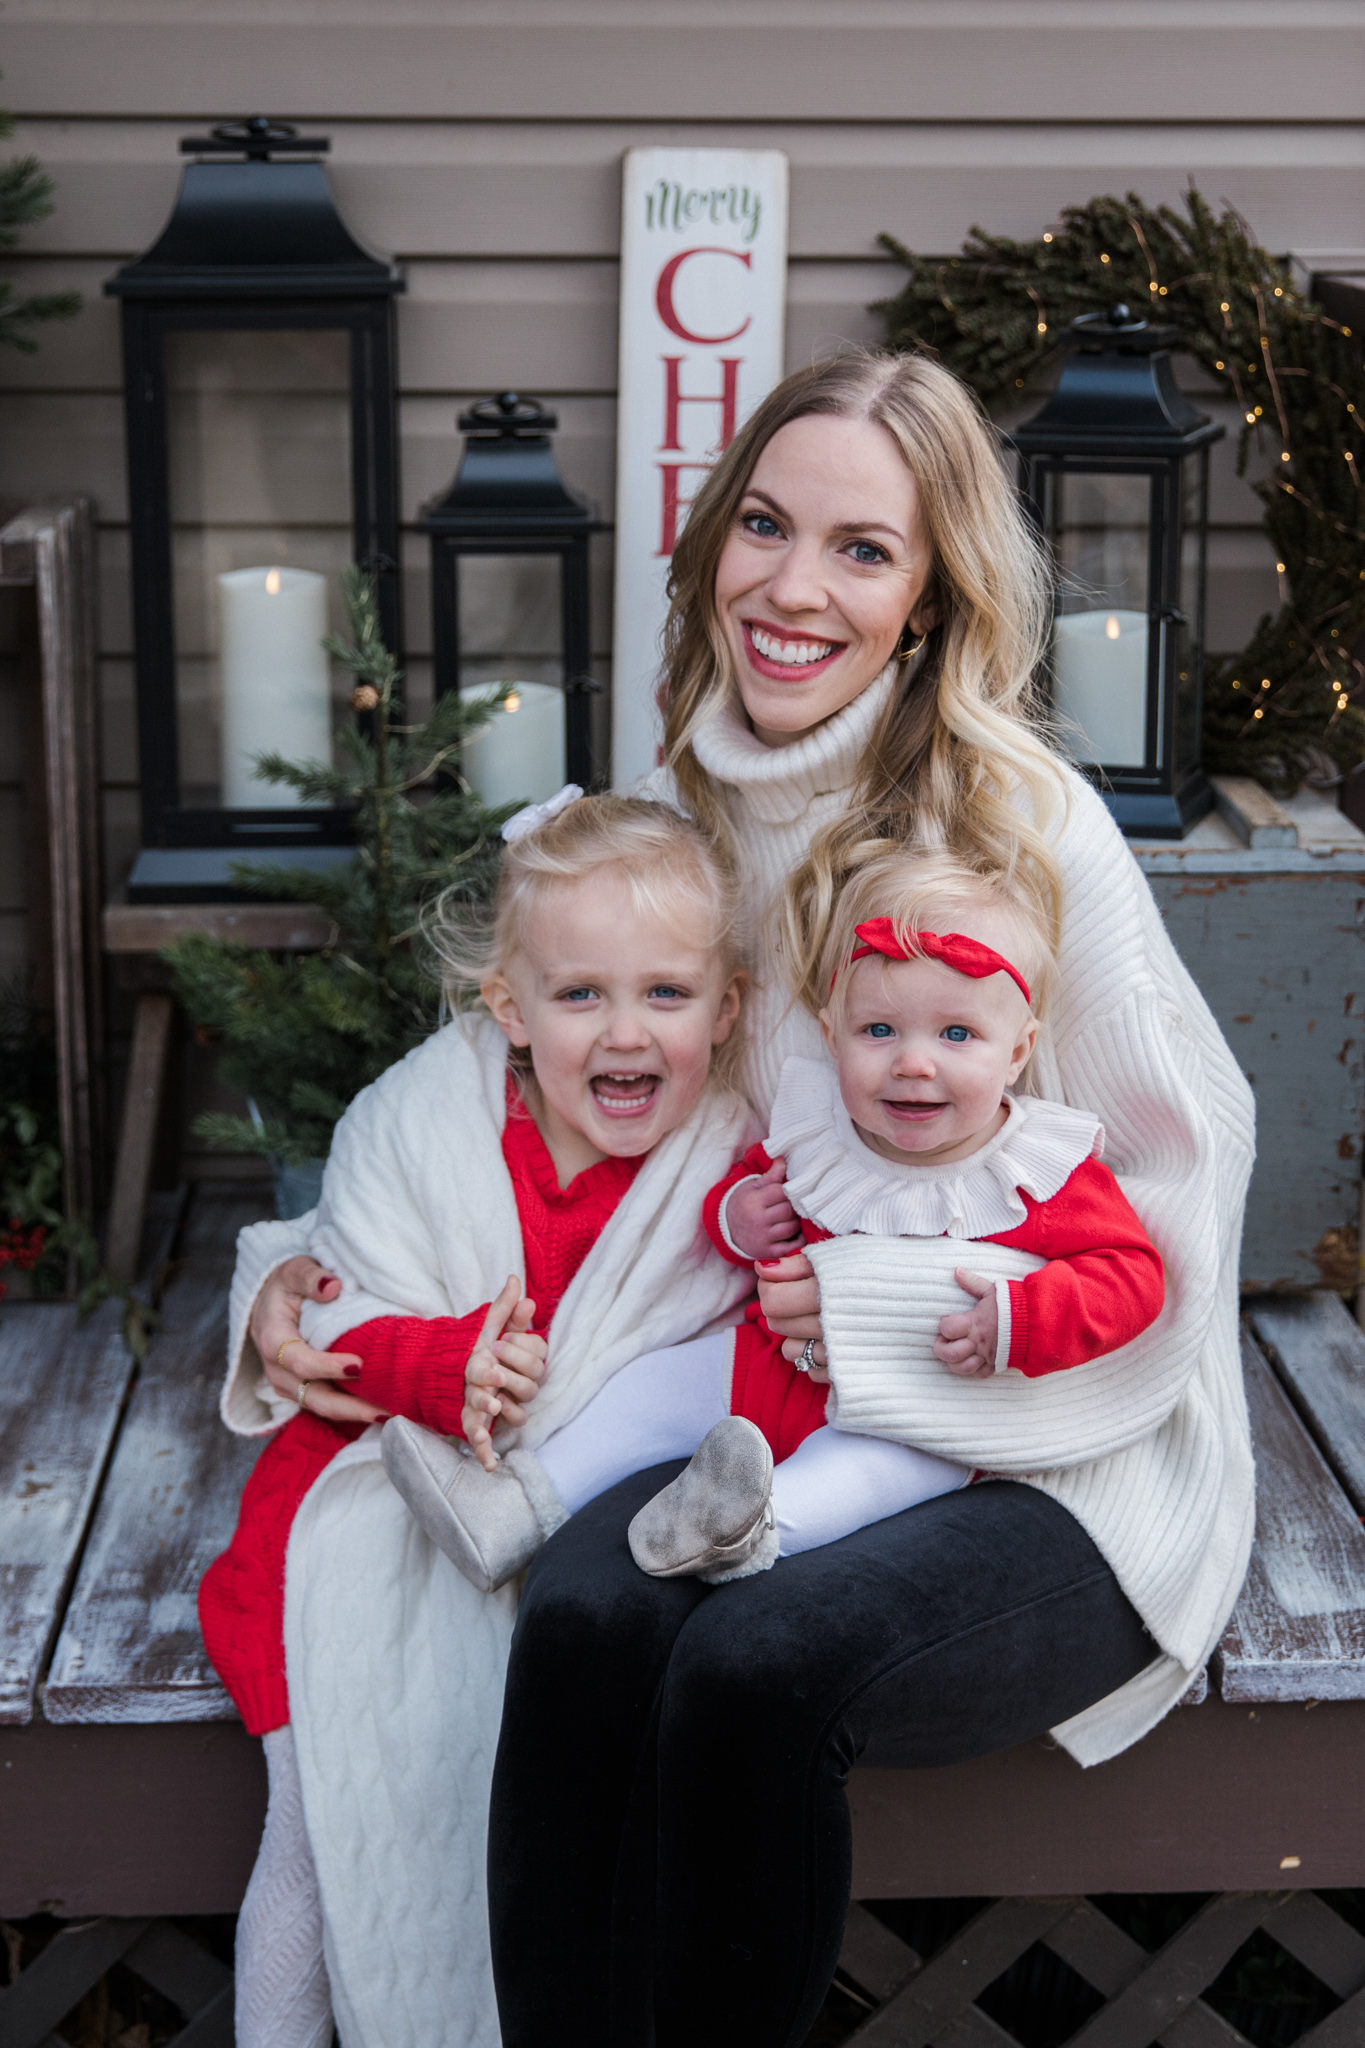 Meagan Brandon of Meagan's Moda Christmas outfits with toddler and baby girl, Christmas outfit ideas for family photos